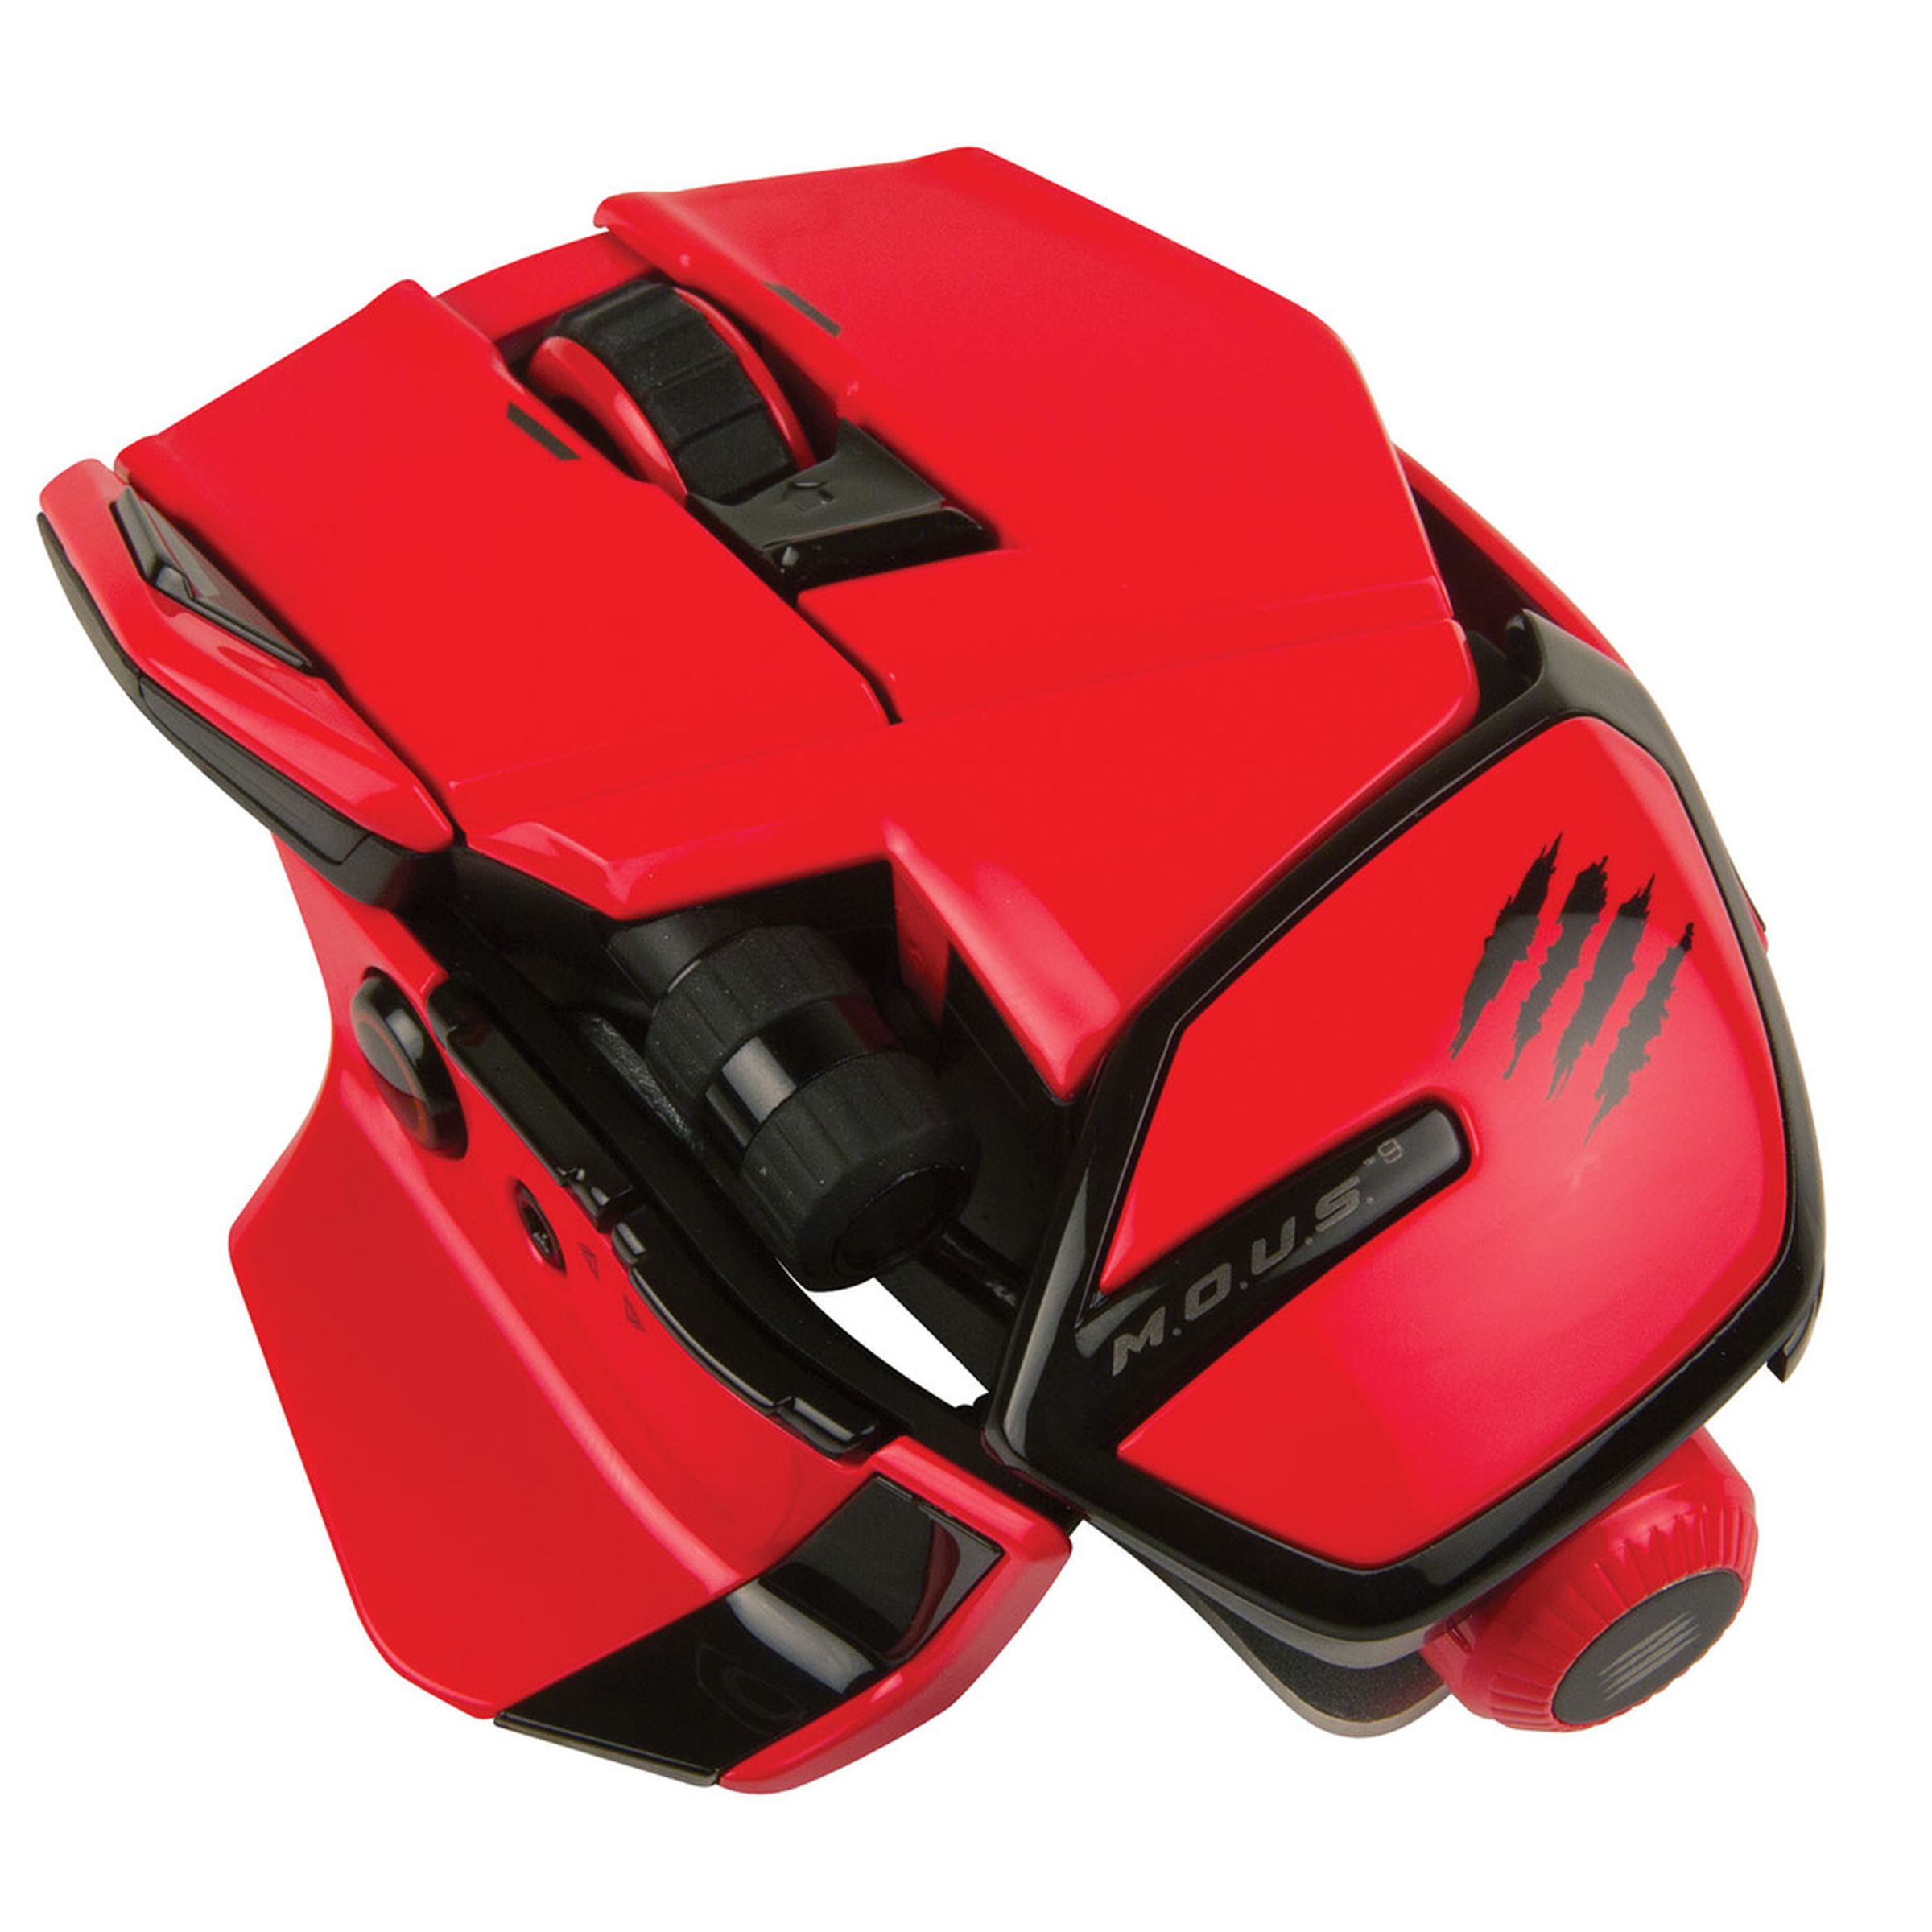 MadCatz R.A.T.M, M.O.U.S.9, F.R.E.Q.M, C.N.T.R.L.R press images